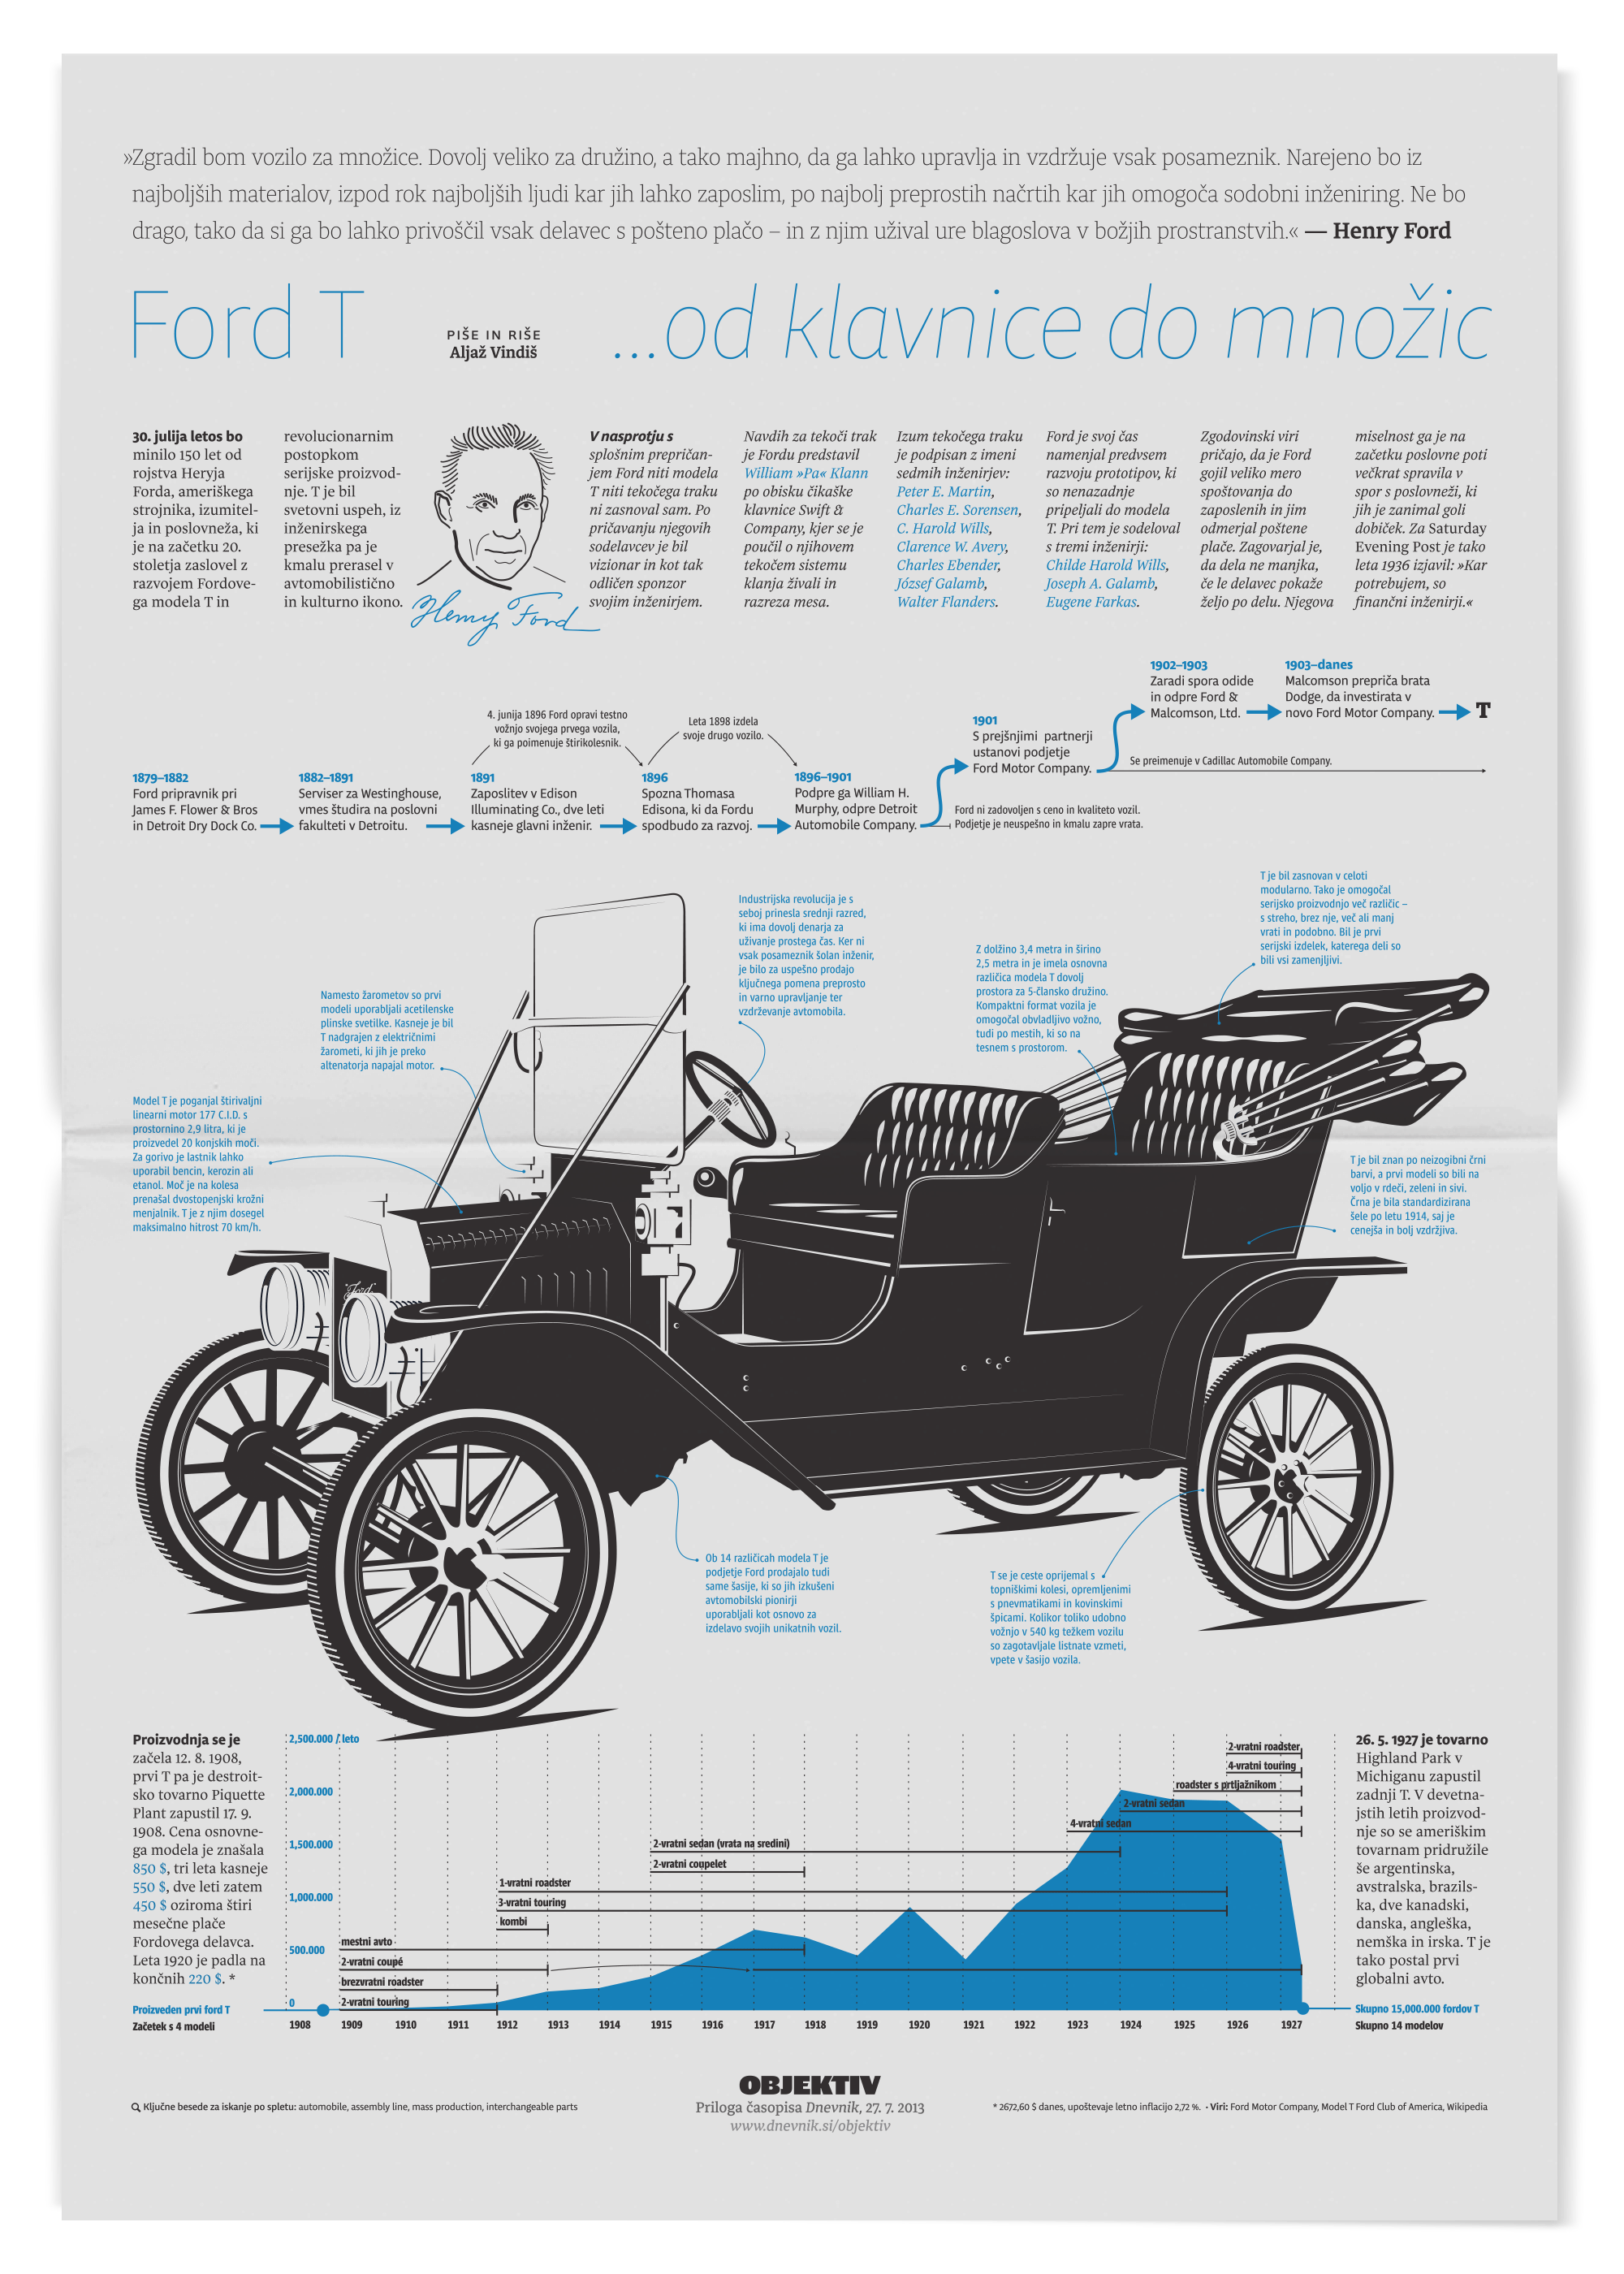 Presentation of the Ford model T.